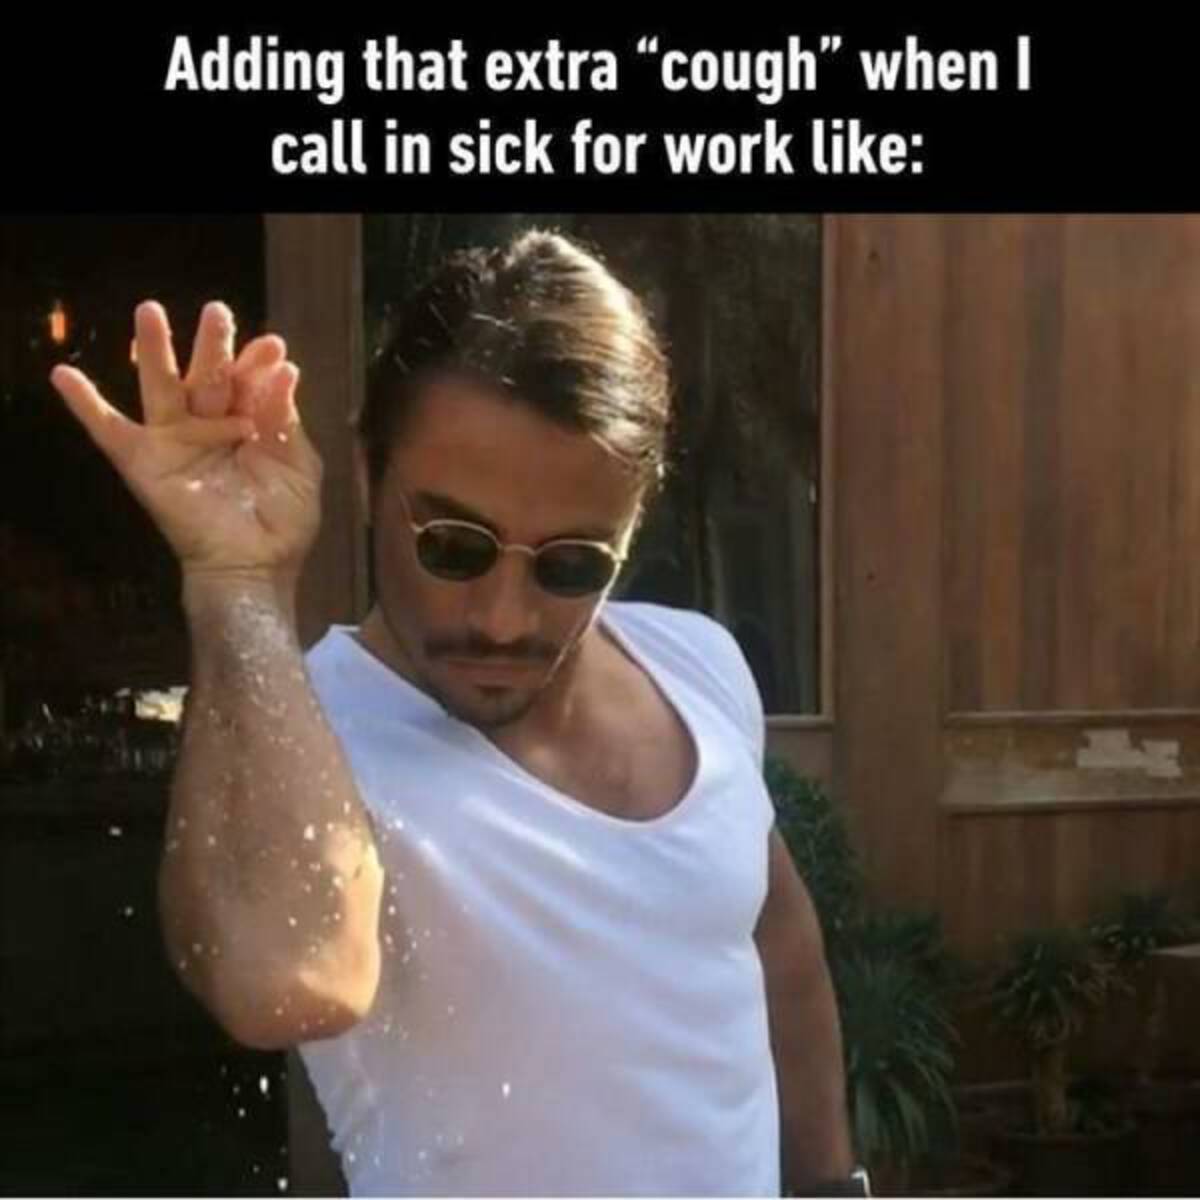 sprinkling salt bae - Adding that extra "cough" when I call in sick for work